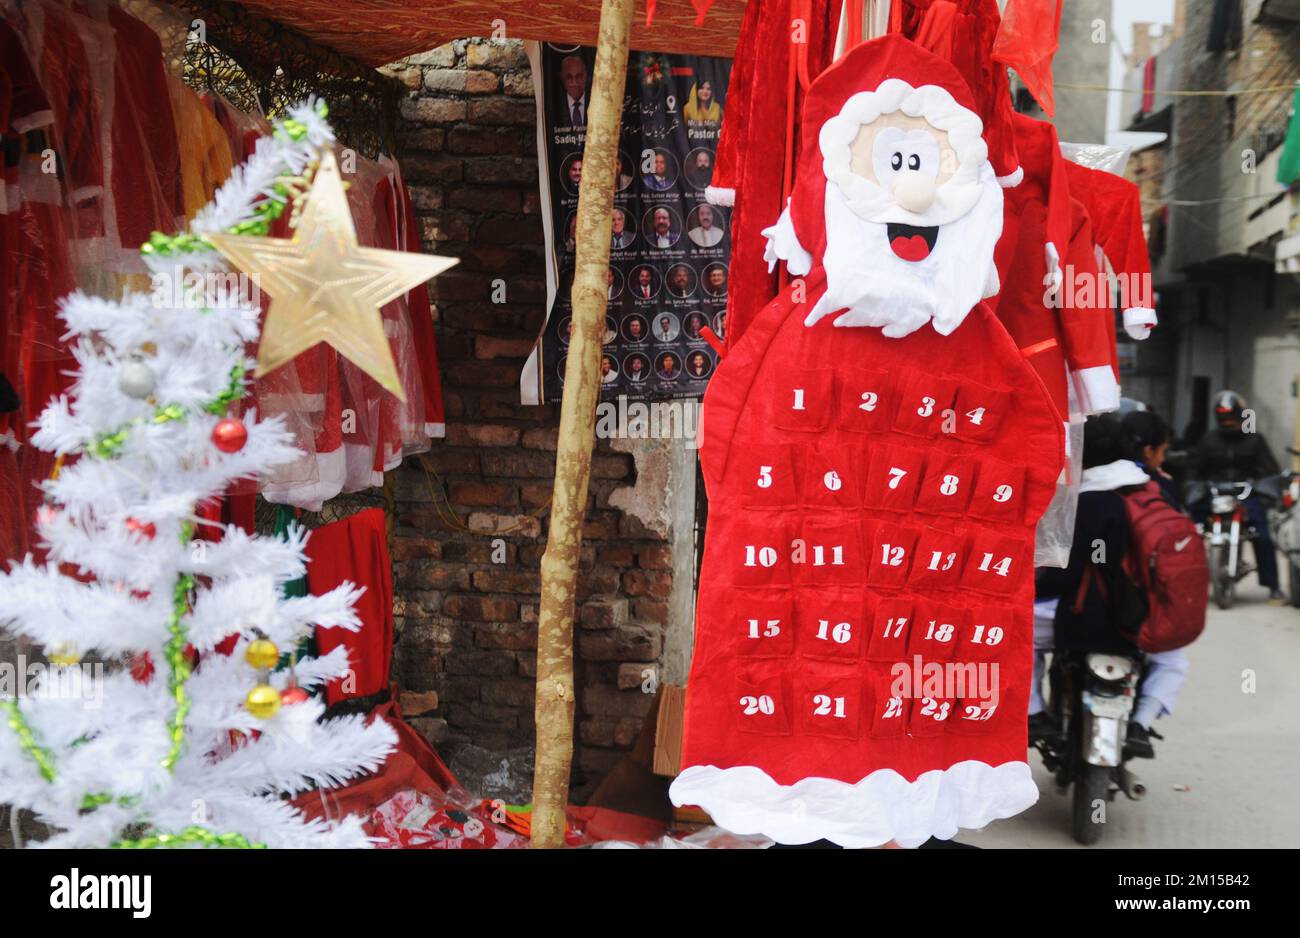 ISLAMABAD, PAKISTAN.A vendor is displaying and selling Santa Claus outfits for the Christmas festival at G-7/2.Photo by Raja Imran Bahadar Stock Photo